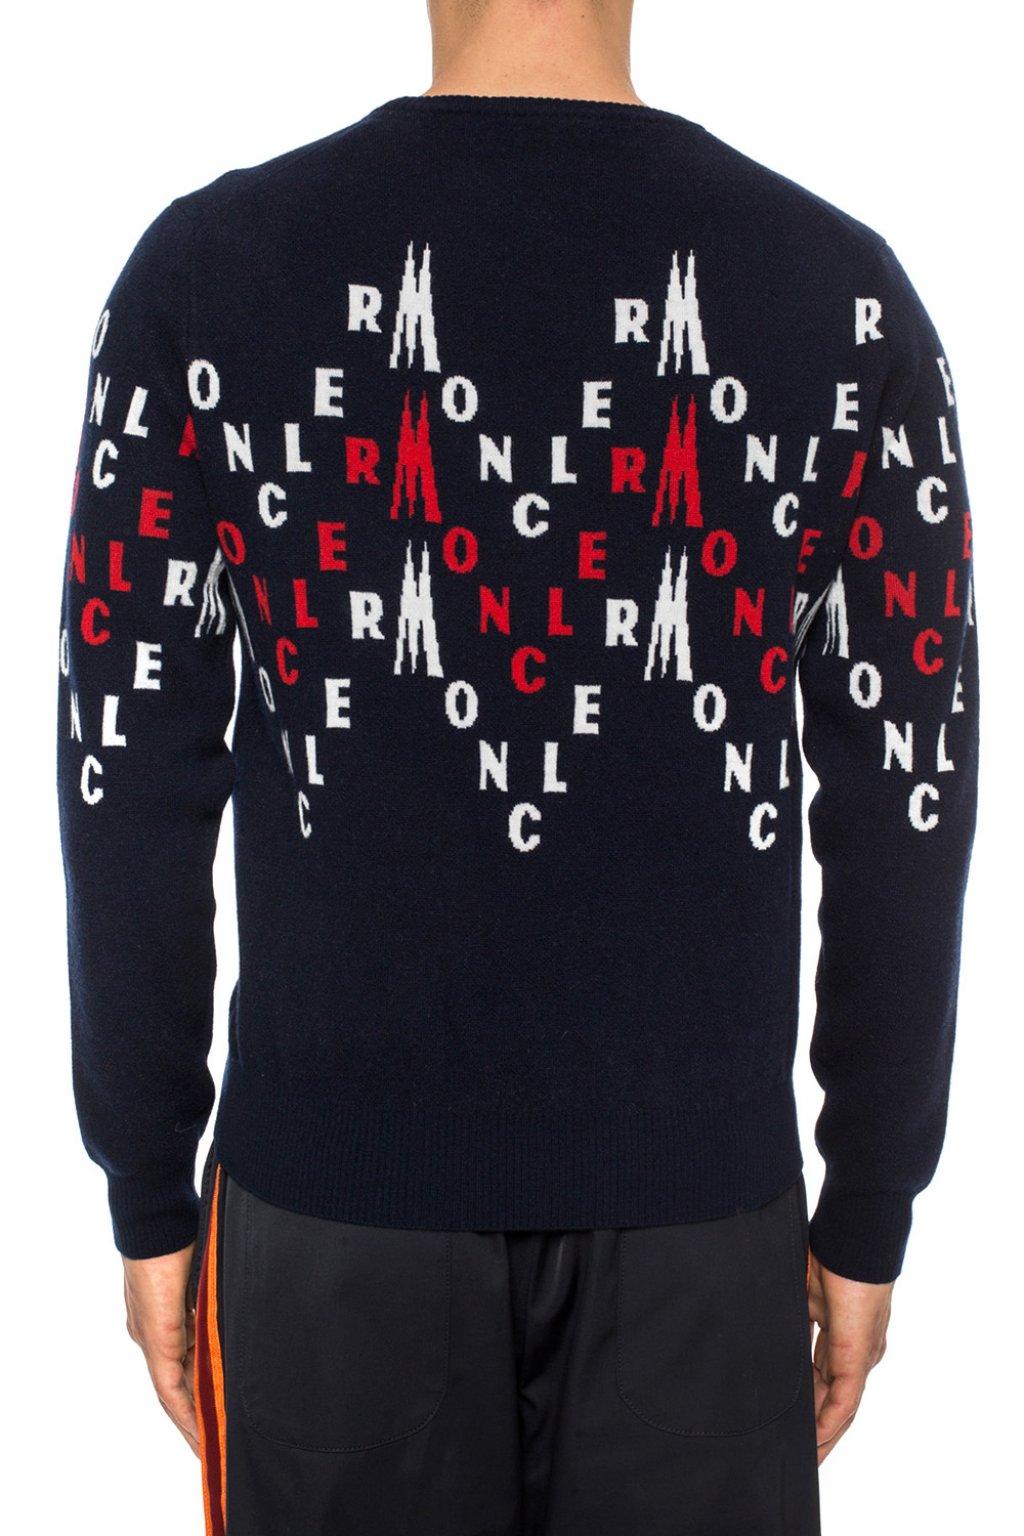 Moncler Allover - Logo Wool Sweater in Navy Blue (Blue) for Men - Save ...